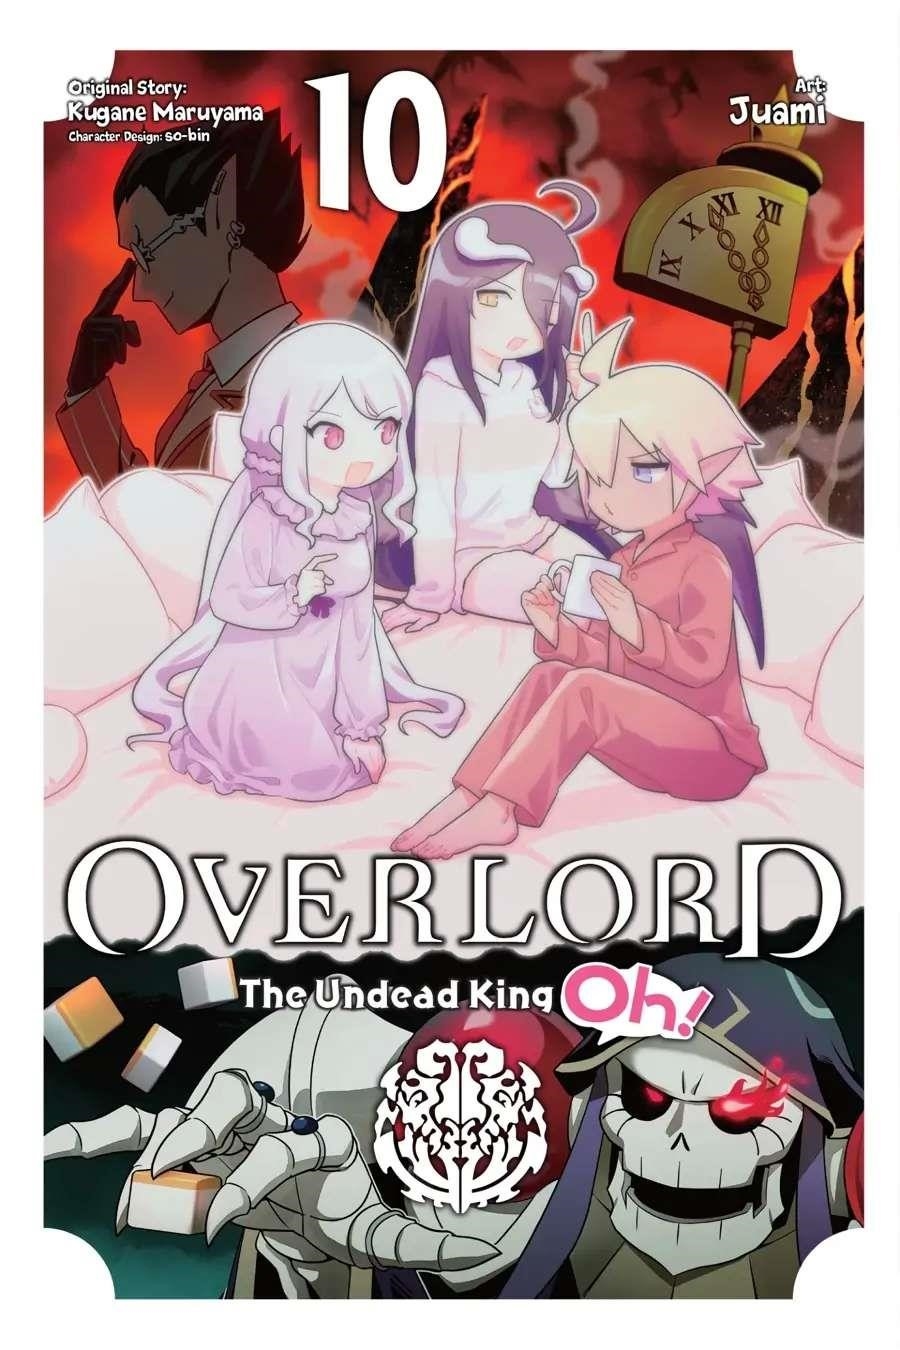 Overlord The Undead King Oh Chapter 55 - Page 1